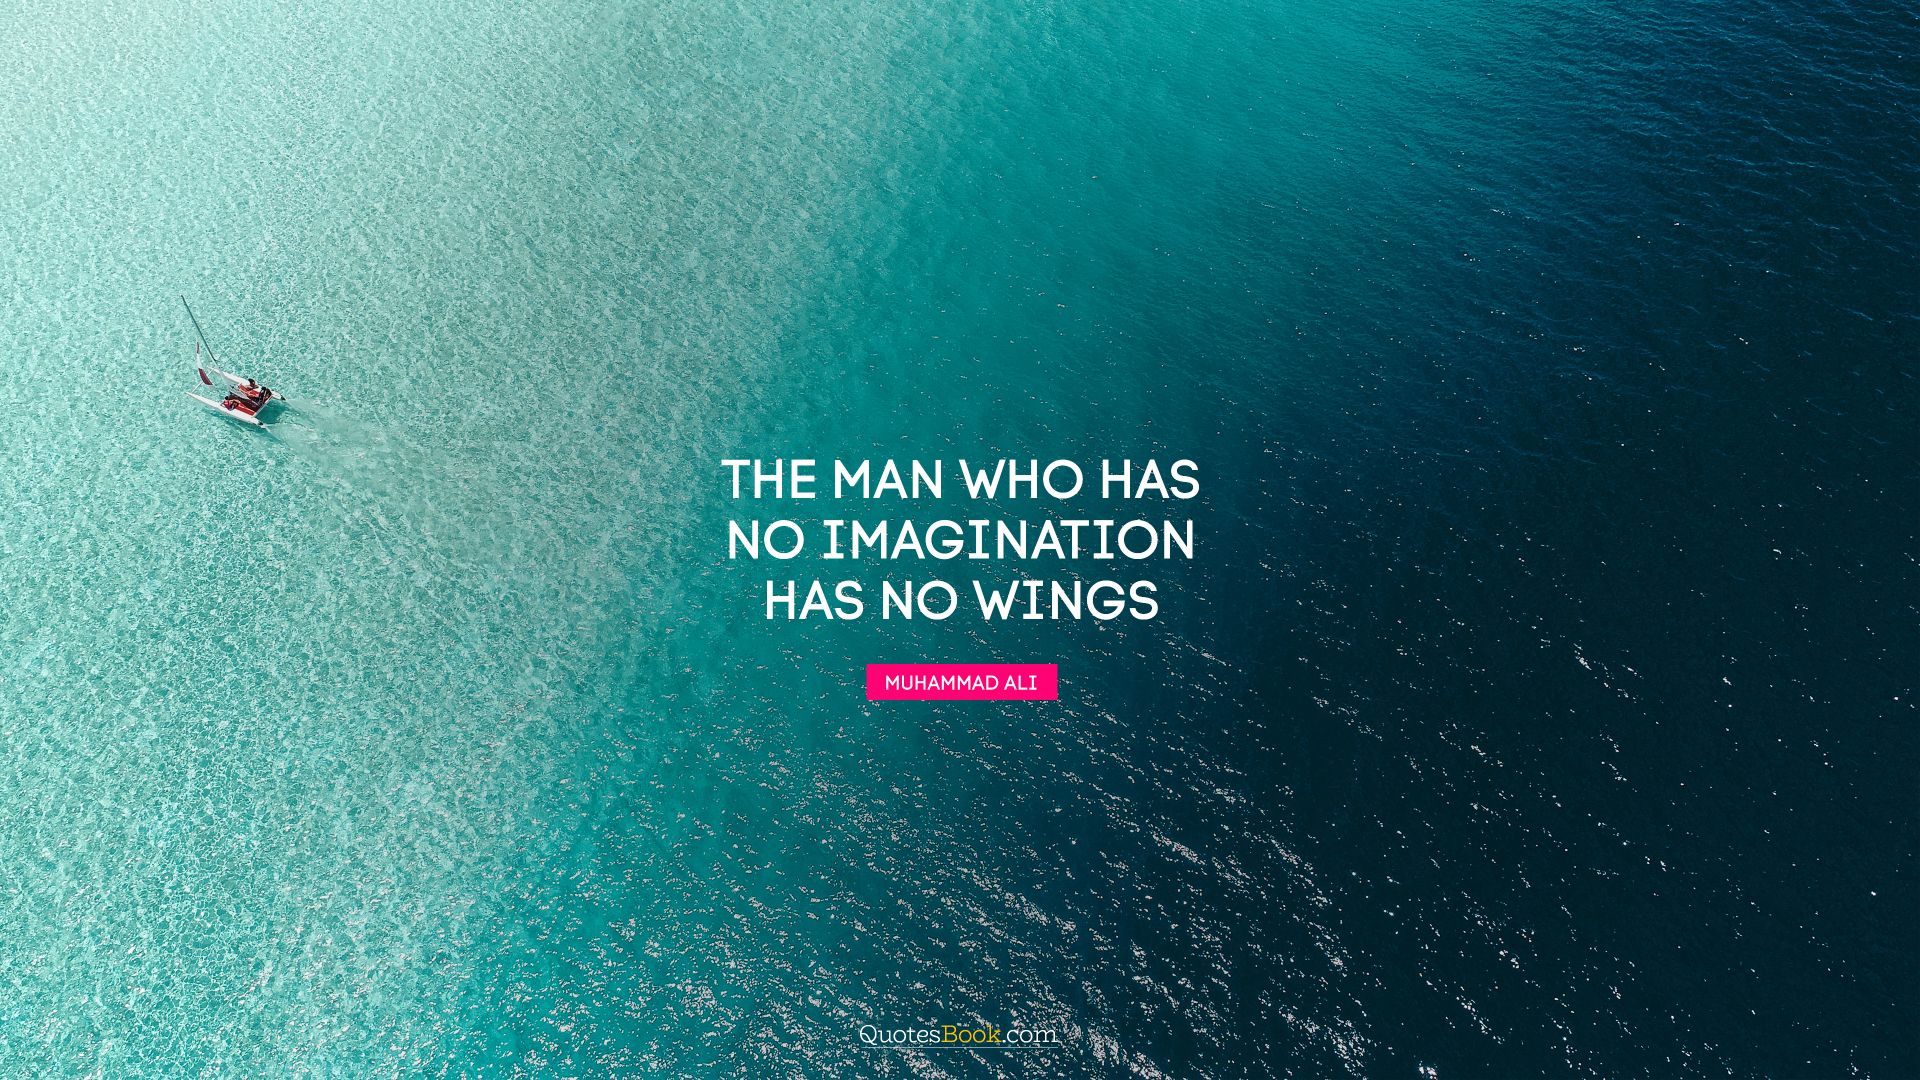 The man who has no imagination has no wings. - Quote by Muhammad Ali